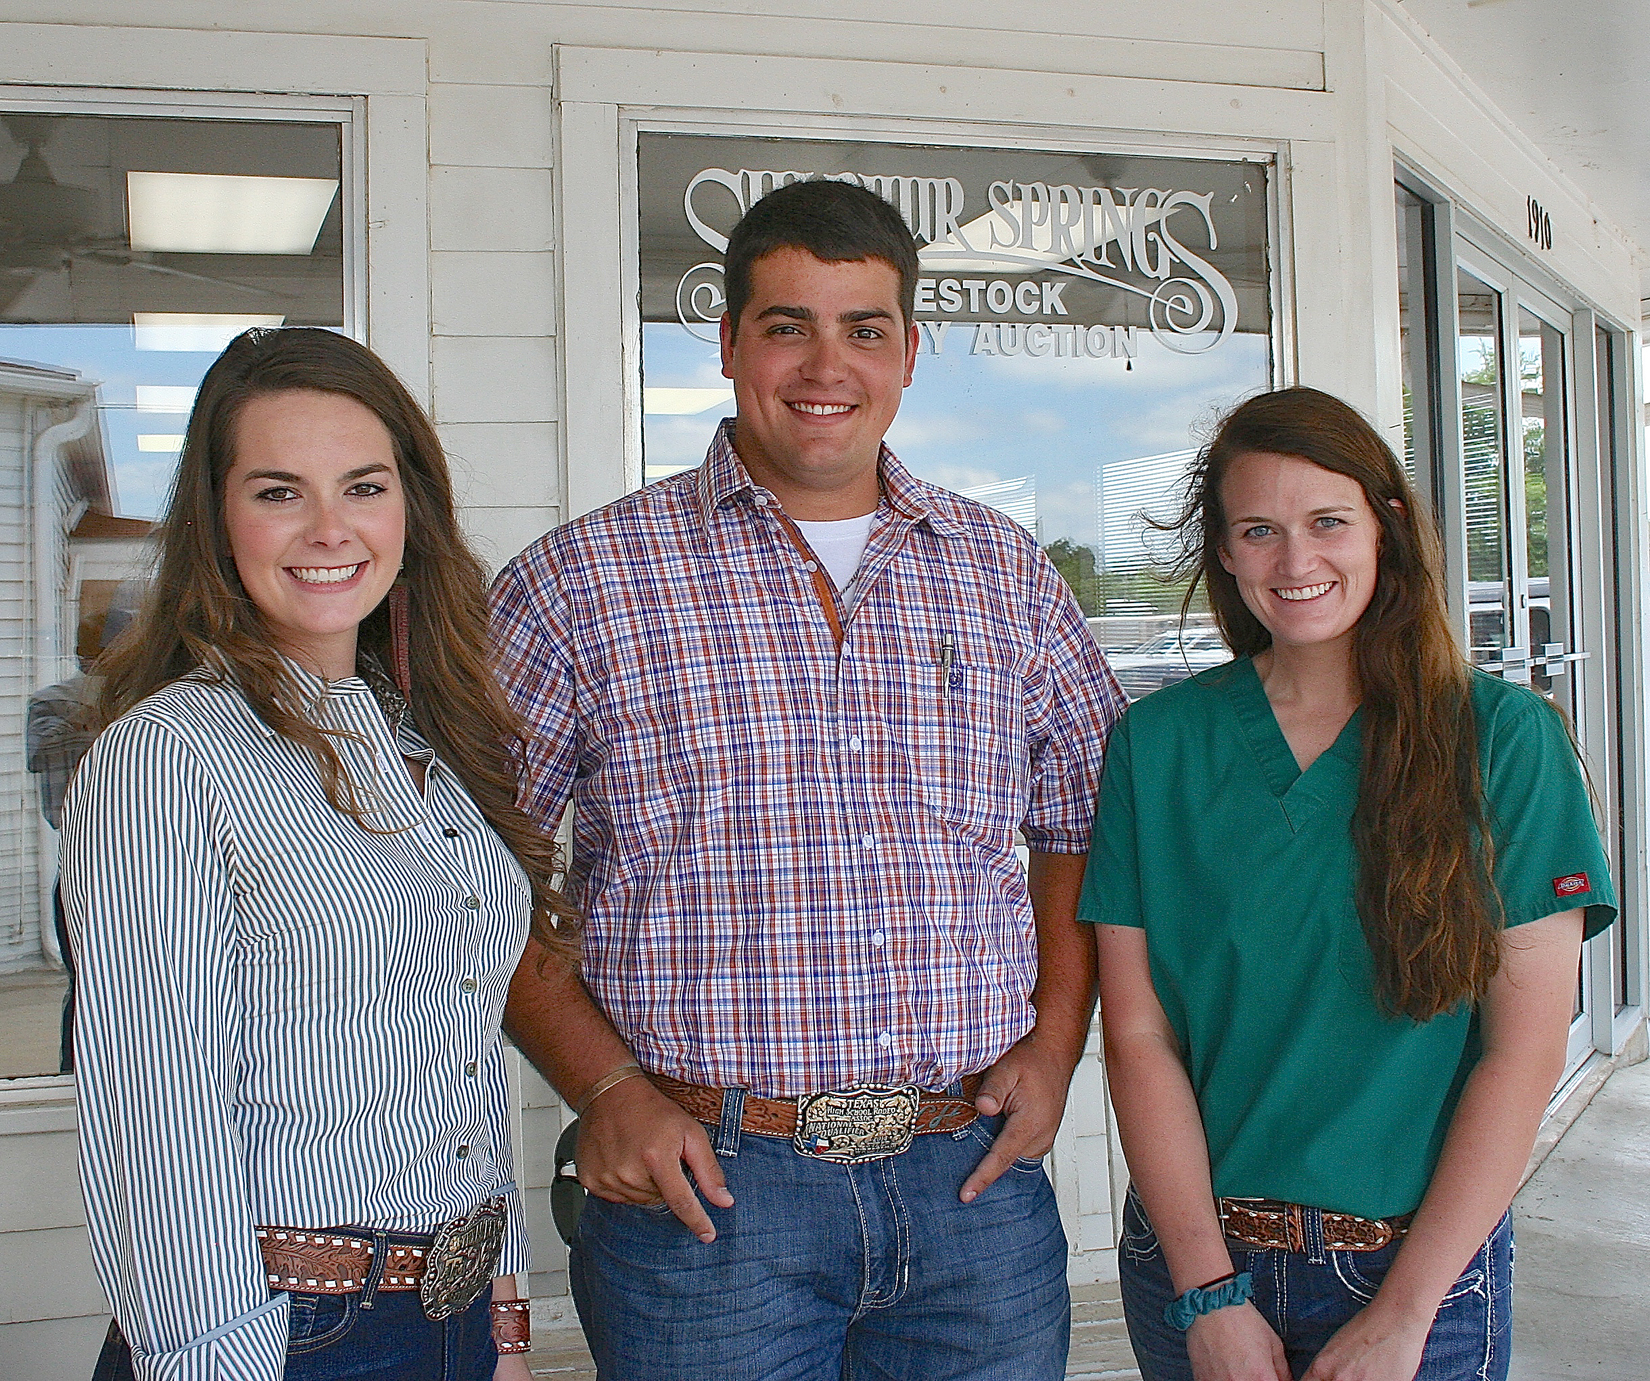 Northeast Texas Beef Improvement Organization (NETBIO) Awards Scholarships to Six Students Majoring in Agriculture